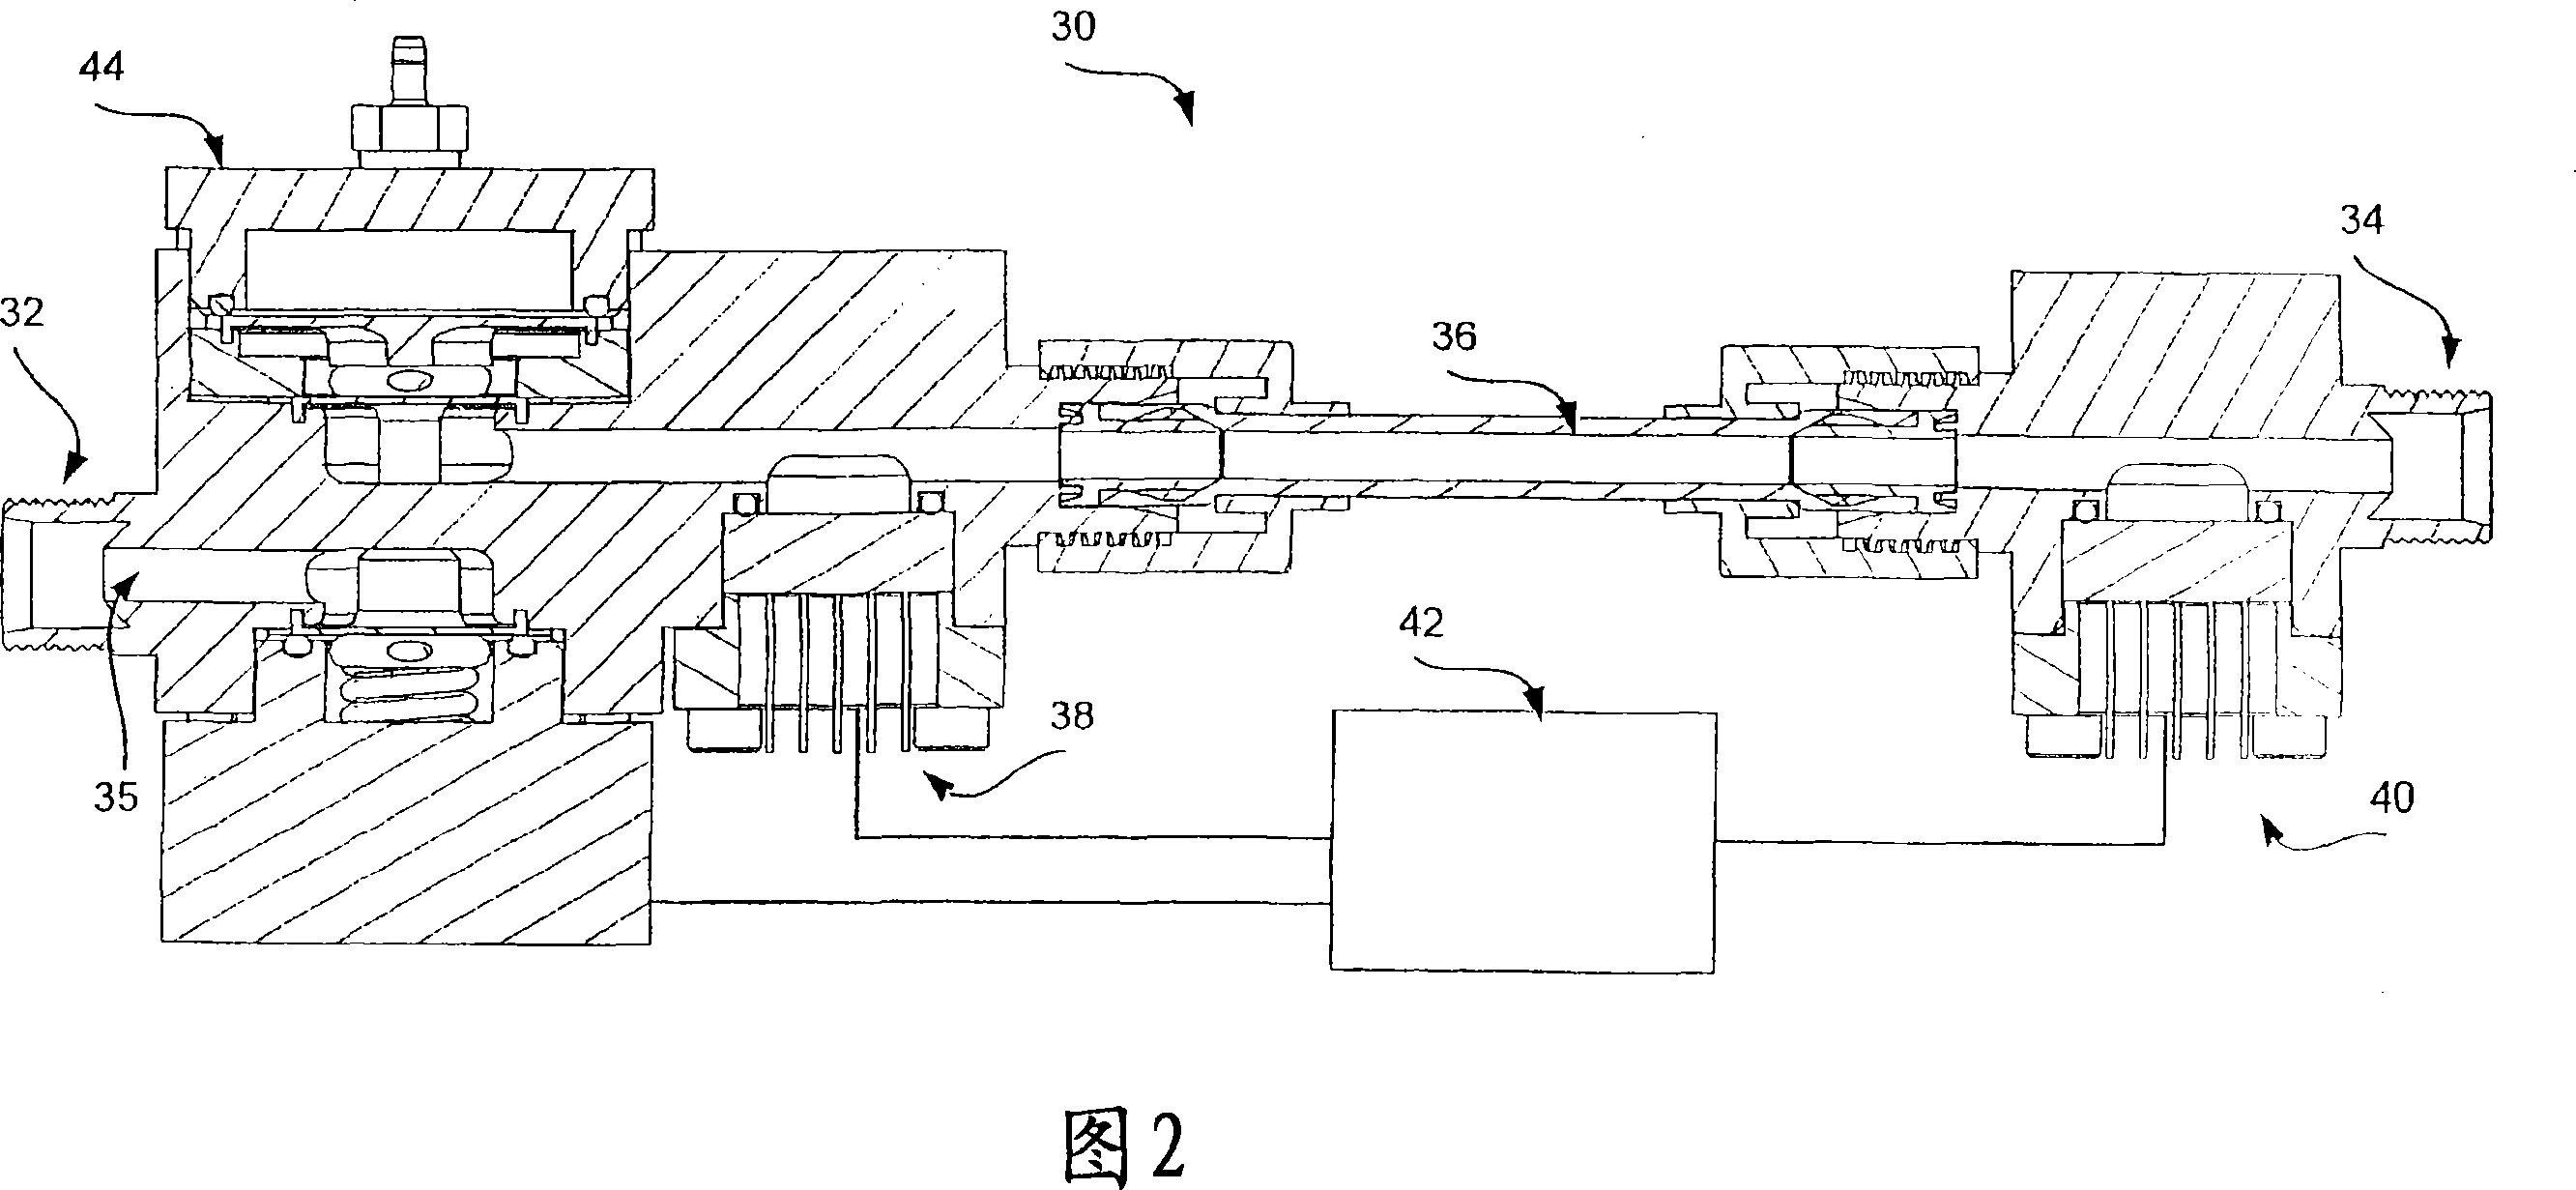 System and method for calibration of a flow device